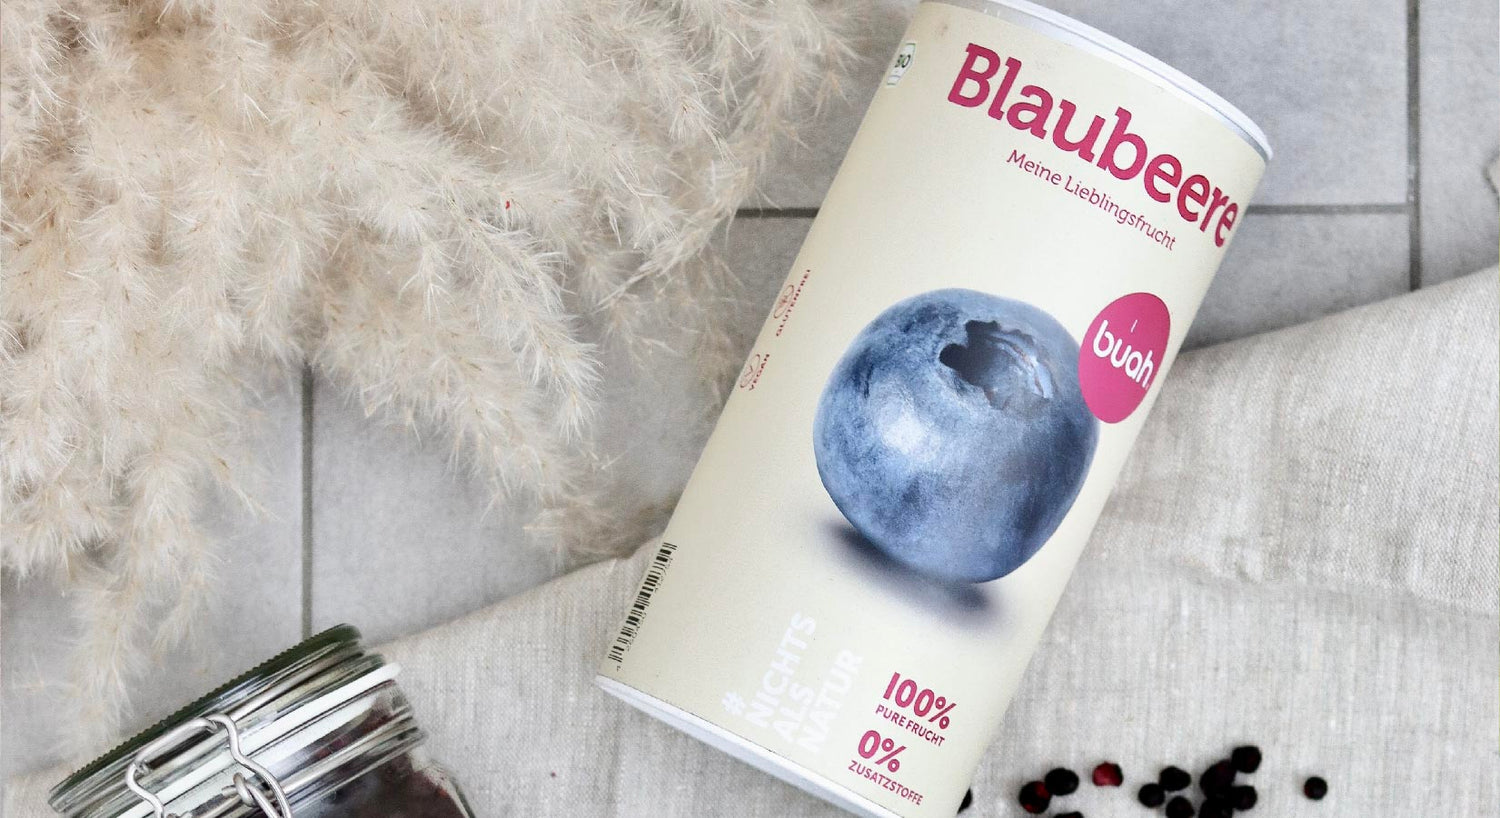 10 facts about the wild blueberry